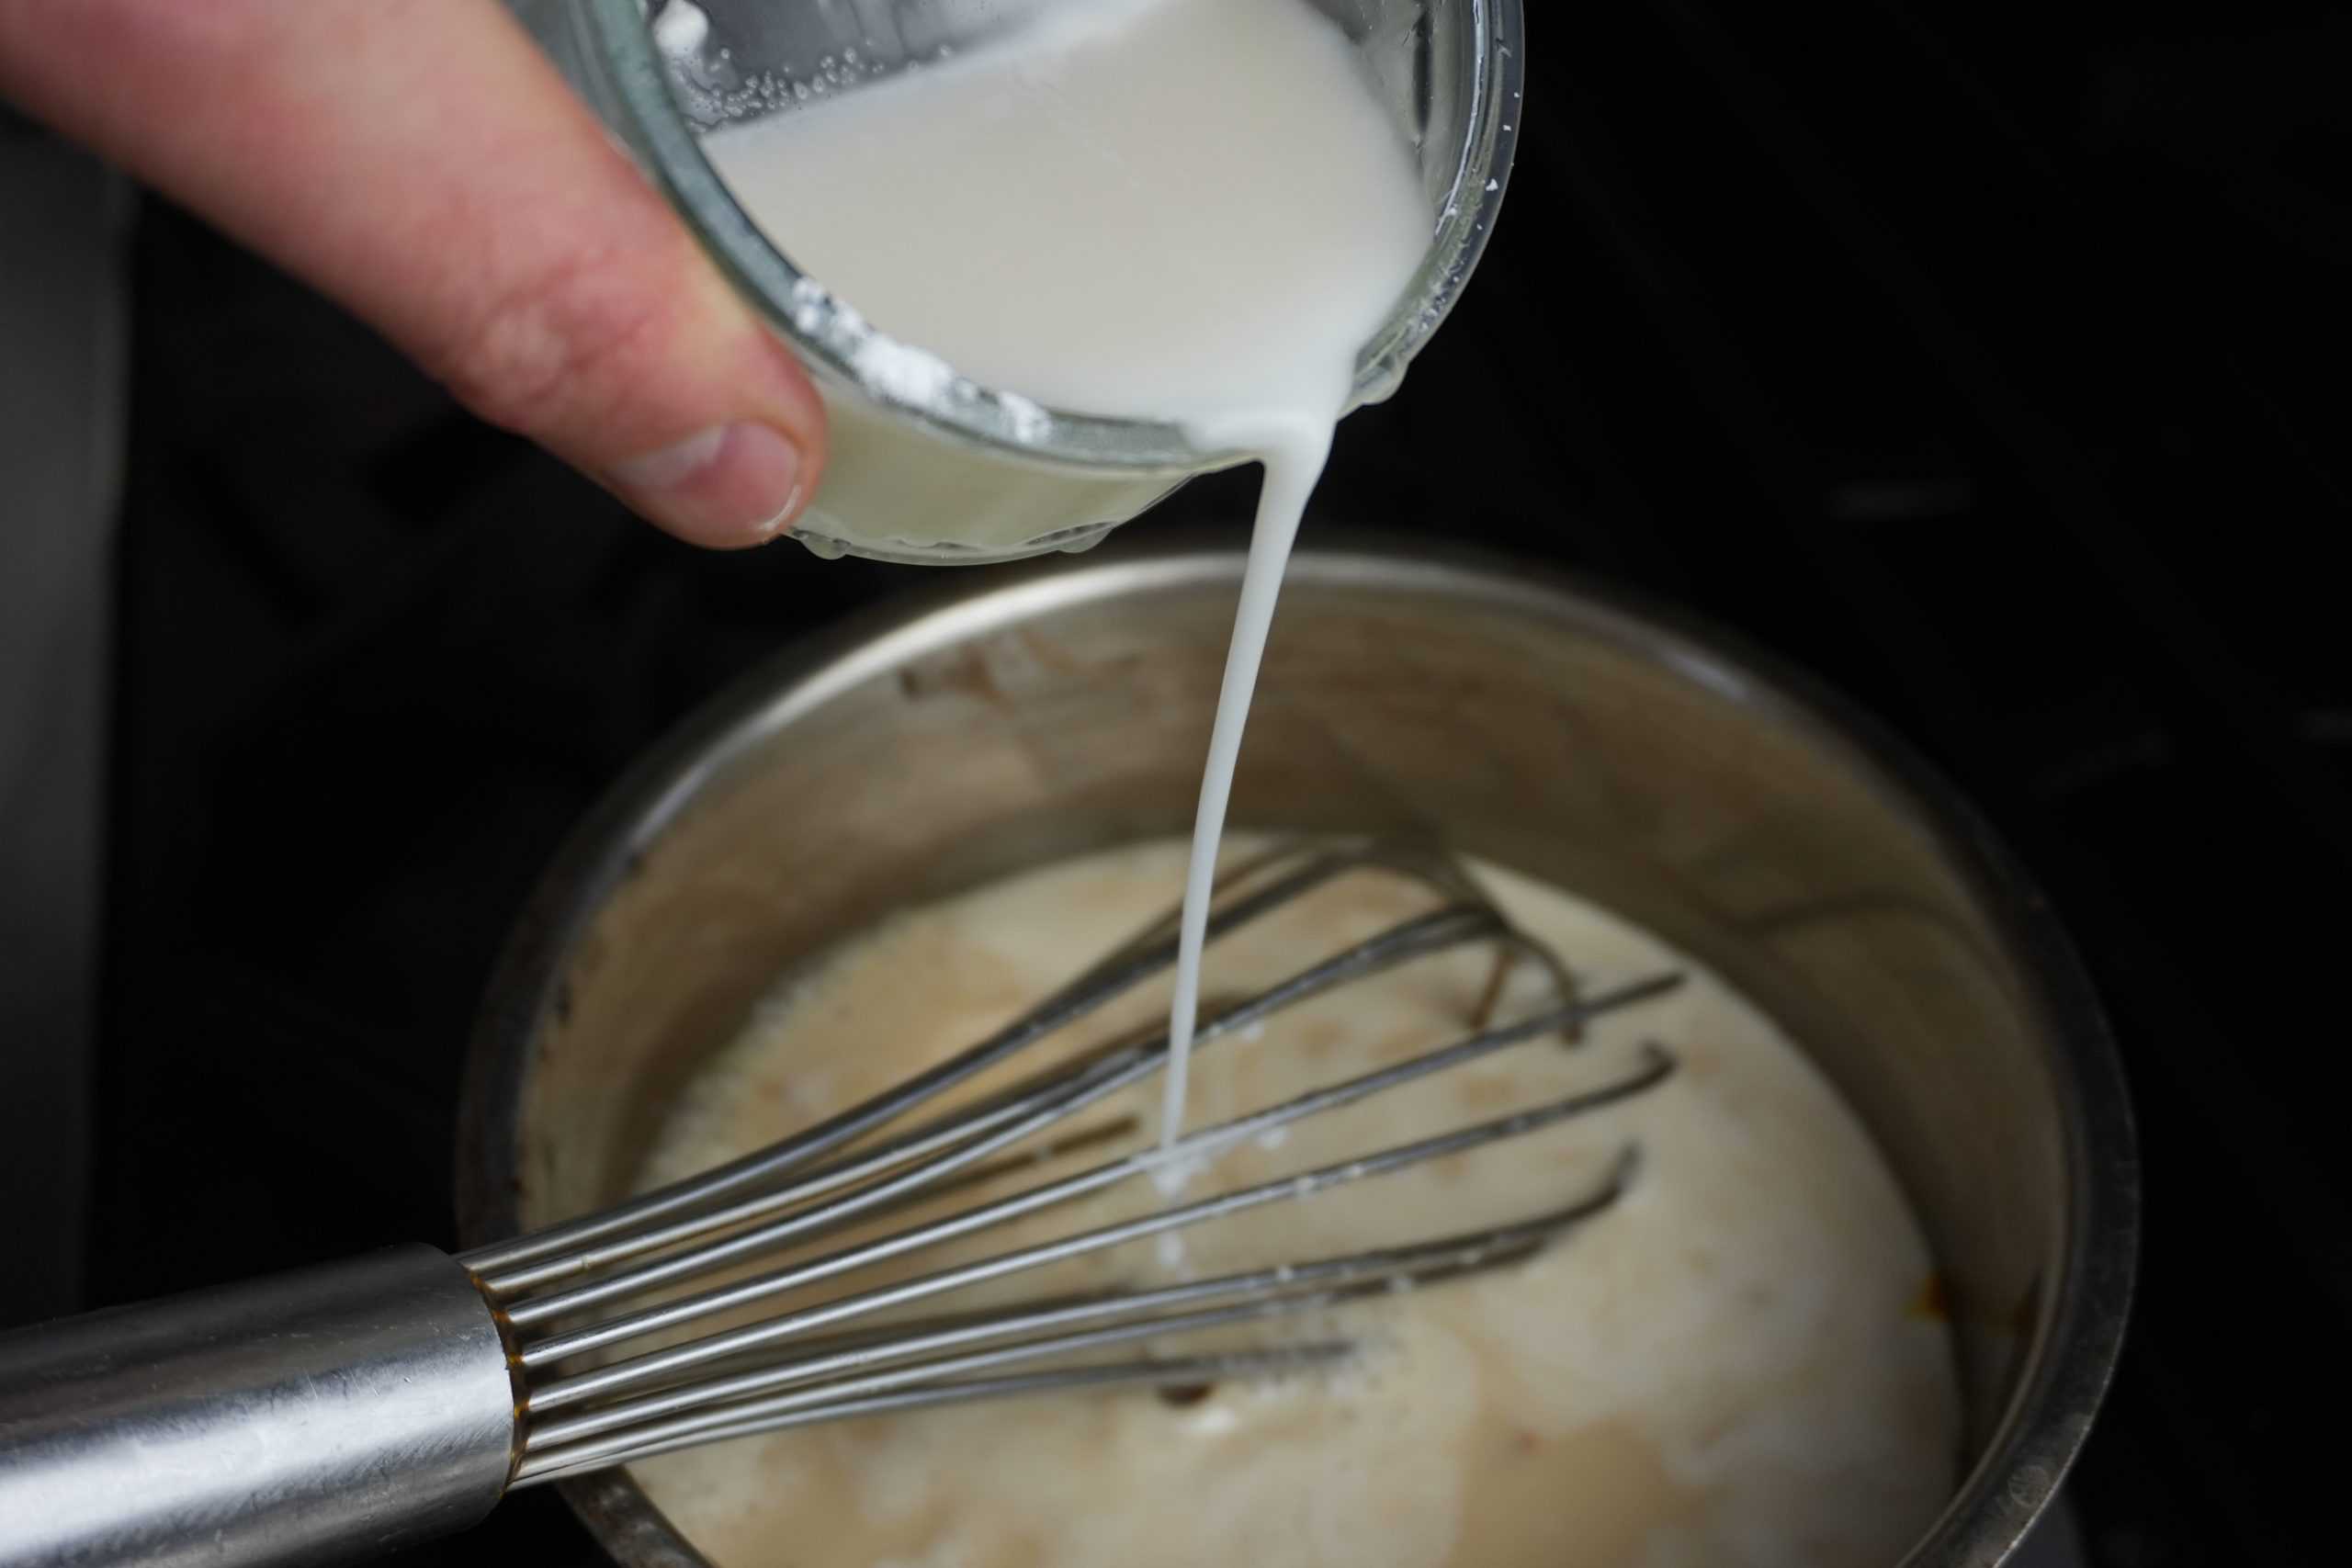 horozontal shot showing slurring being poured into a pot of custard to thicken it. Pot has a whisk in it.